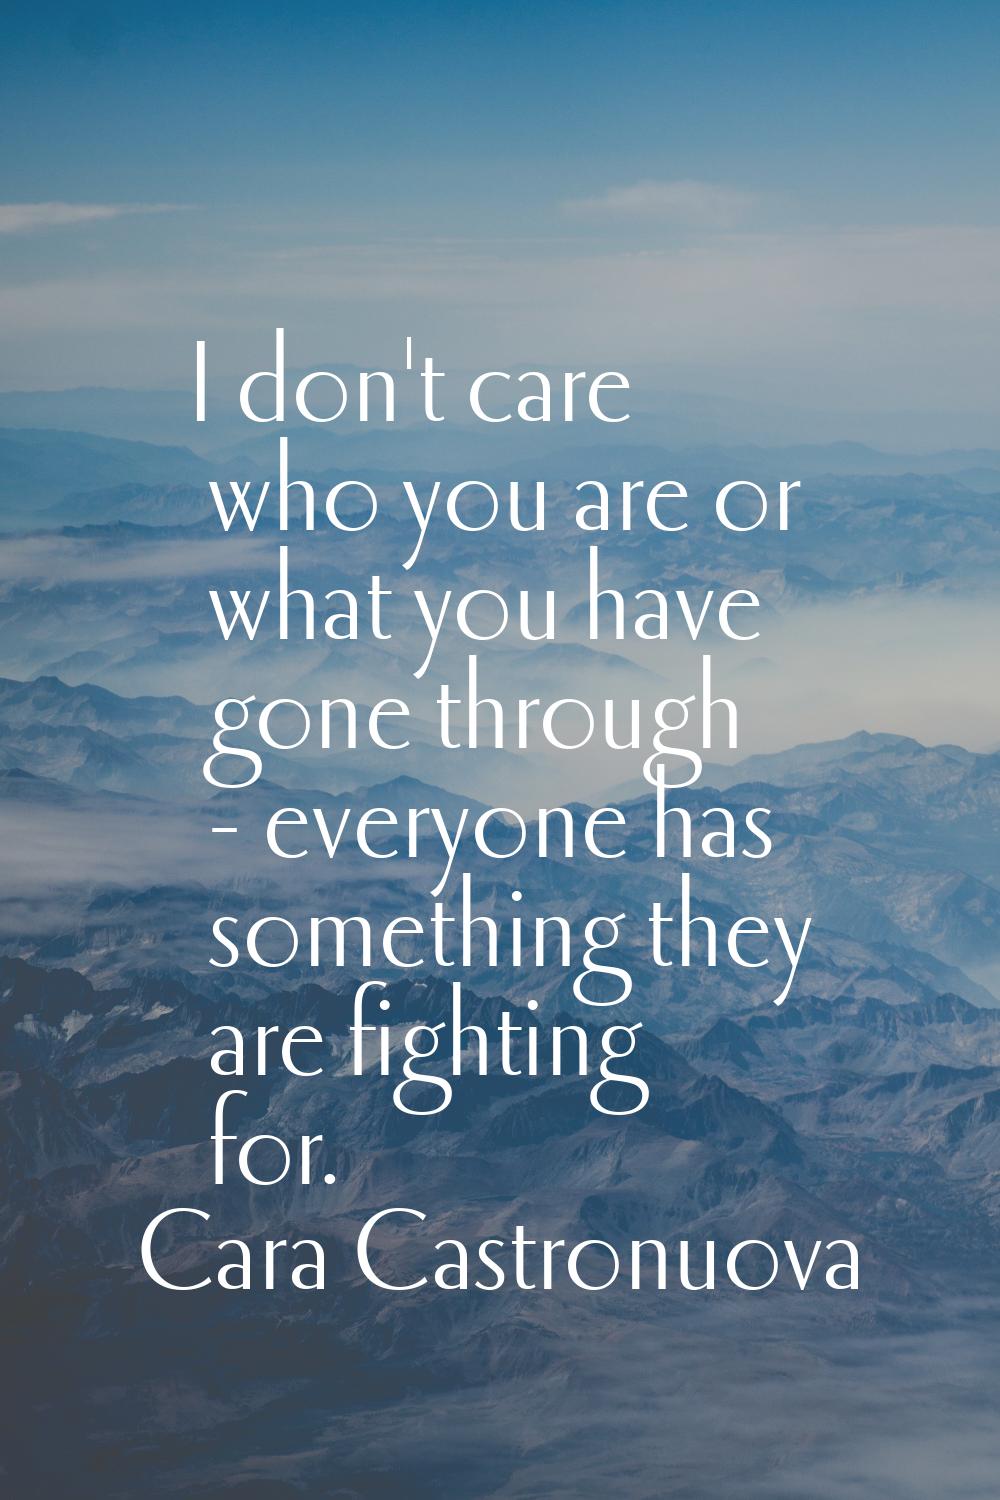 I don't care who you are or what you have gone through - everyone has something they are fighting f